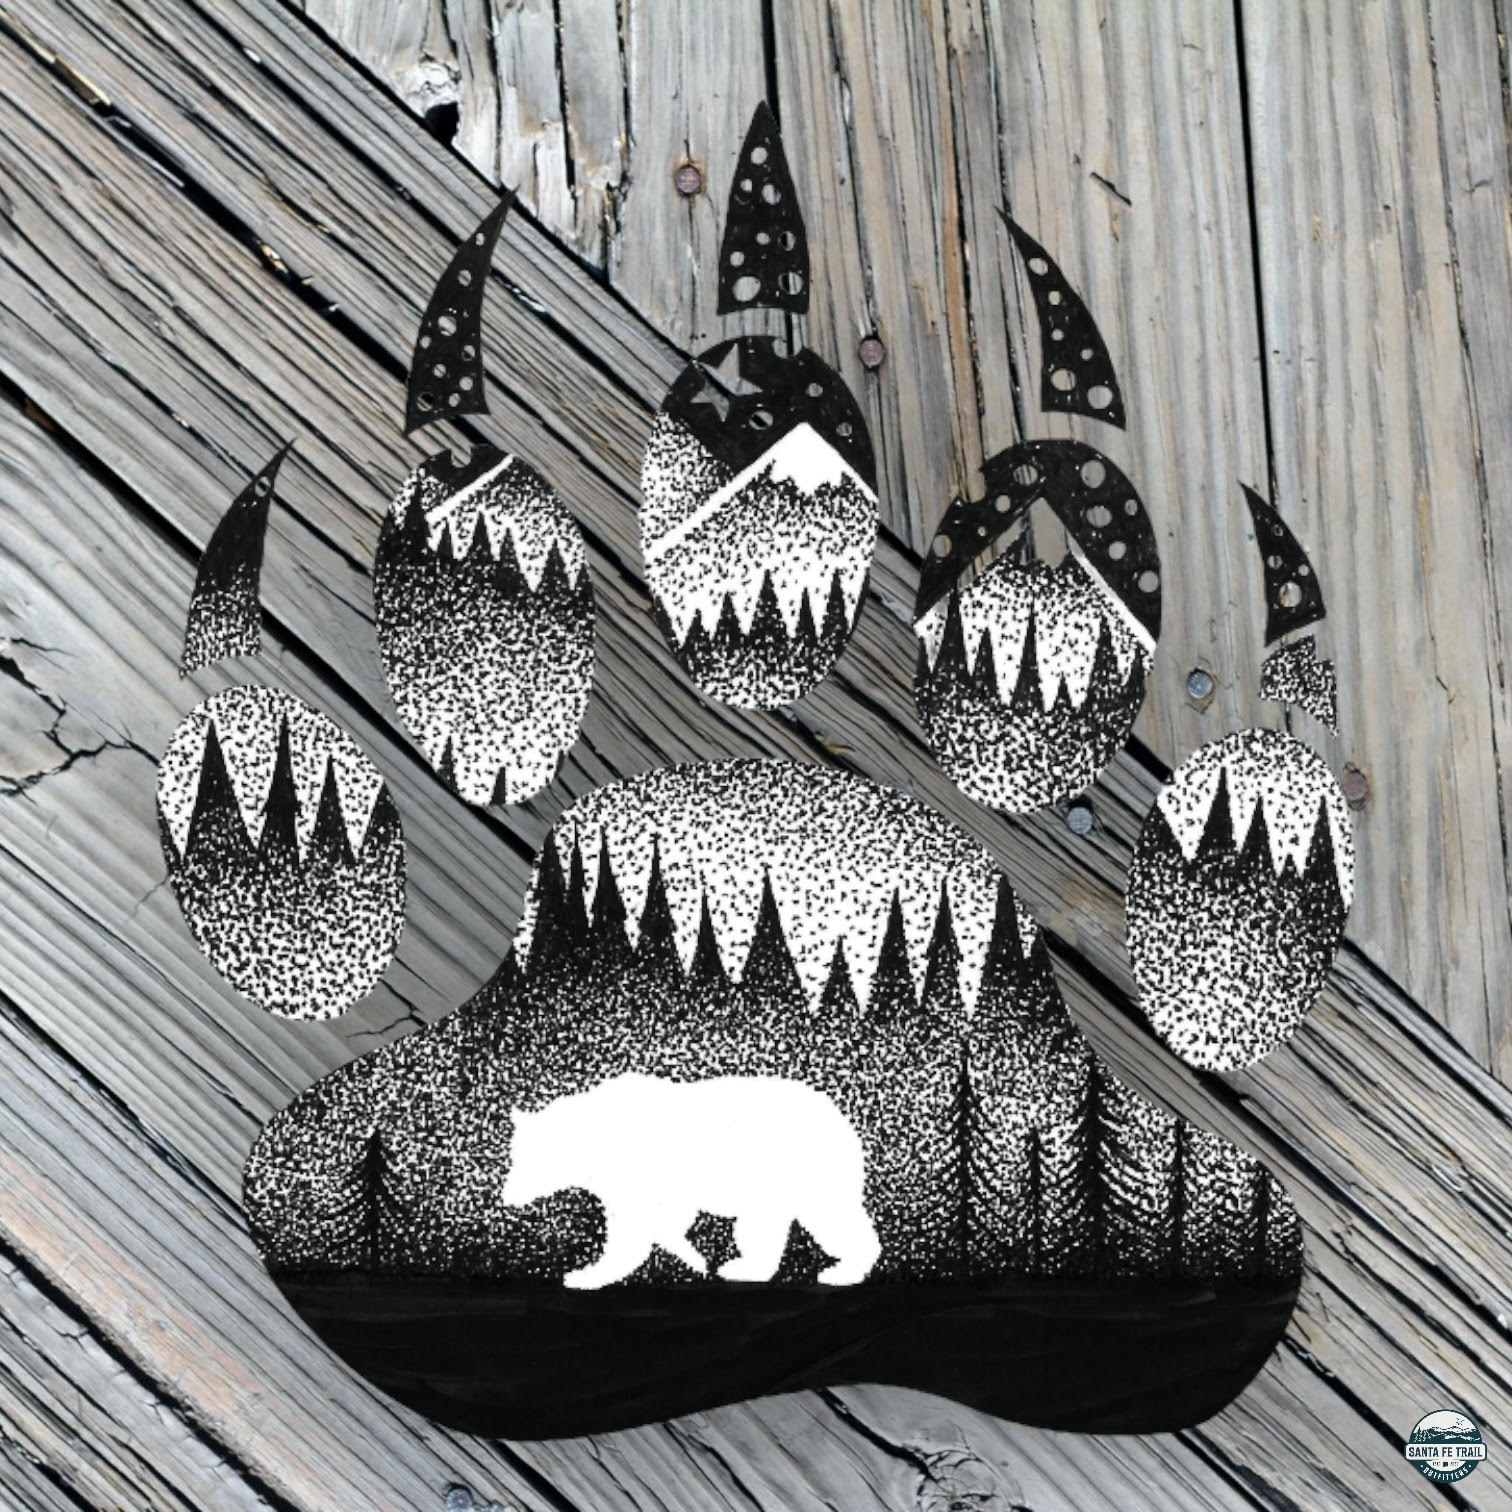 The Bear Paw Outdoor Nature Animal Sticker